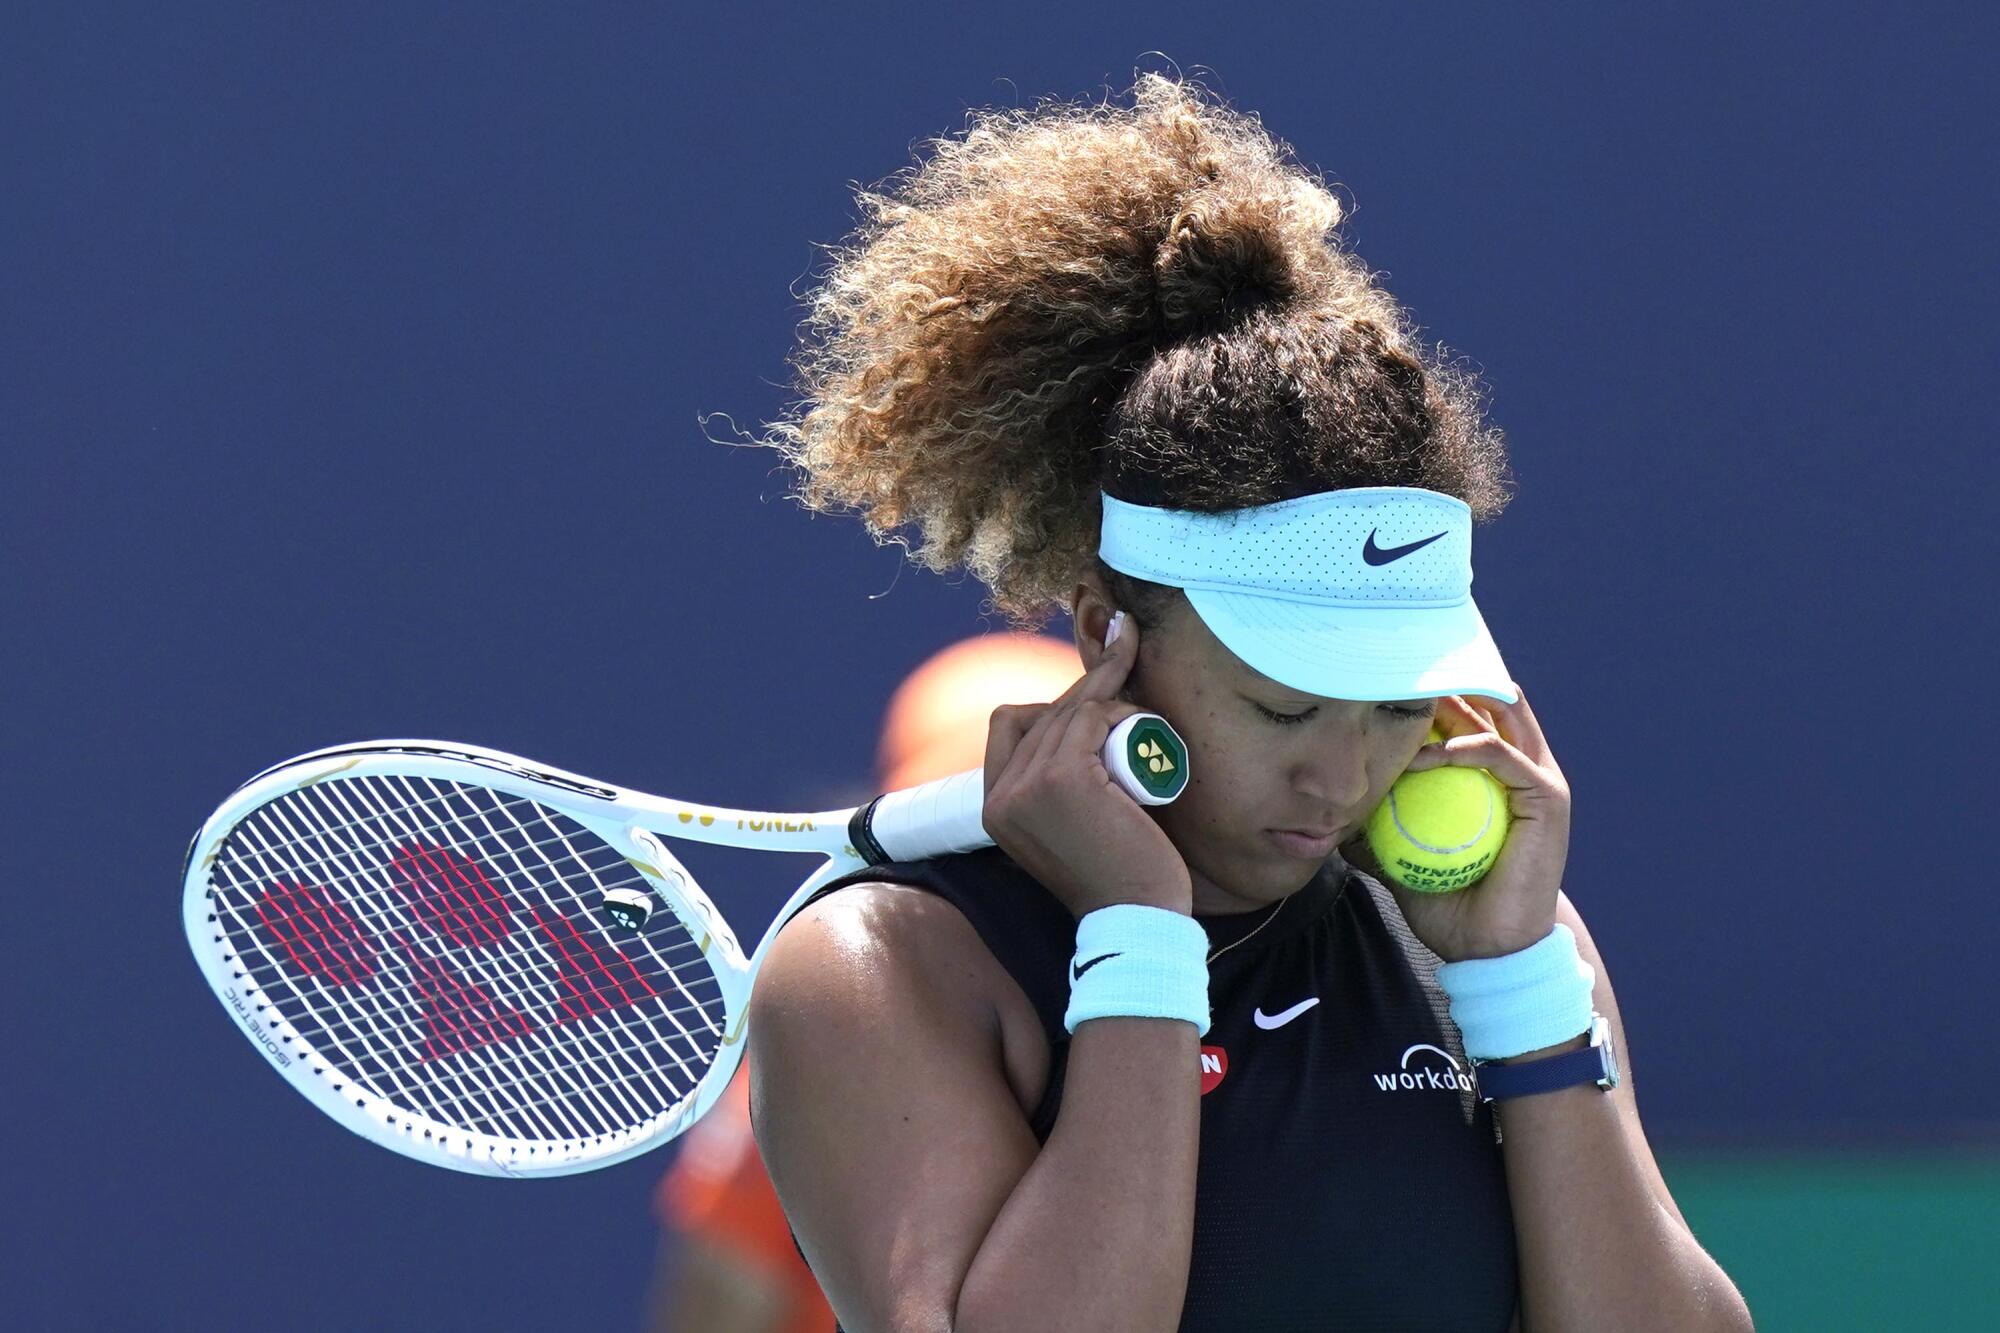 Naomi Osaka, holding tennis racket and ball, leans her head forward and presses her fingers against her ears.